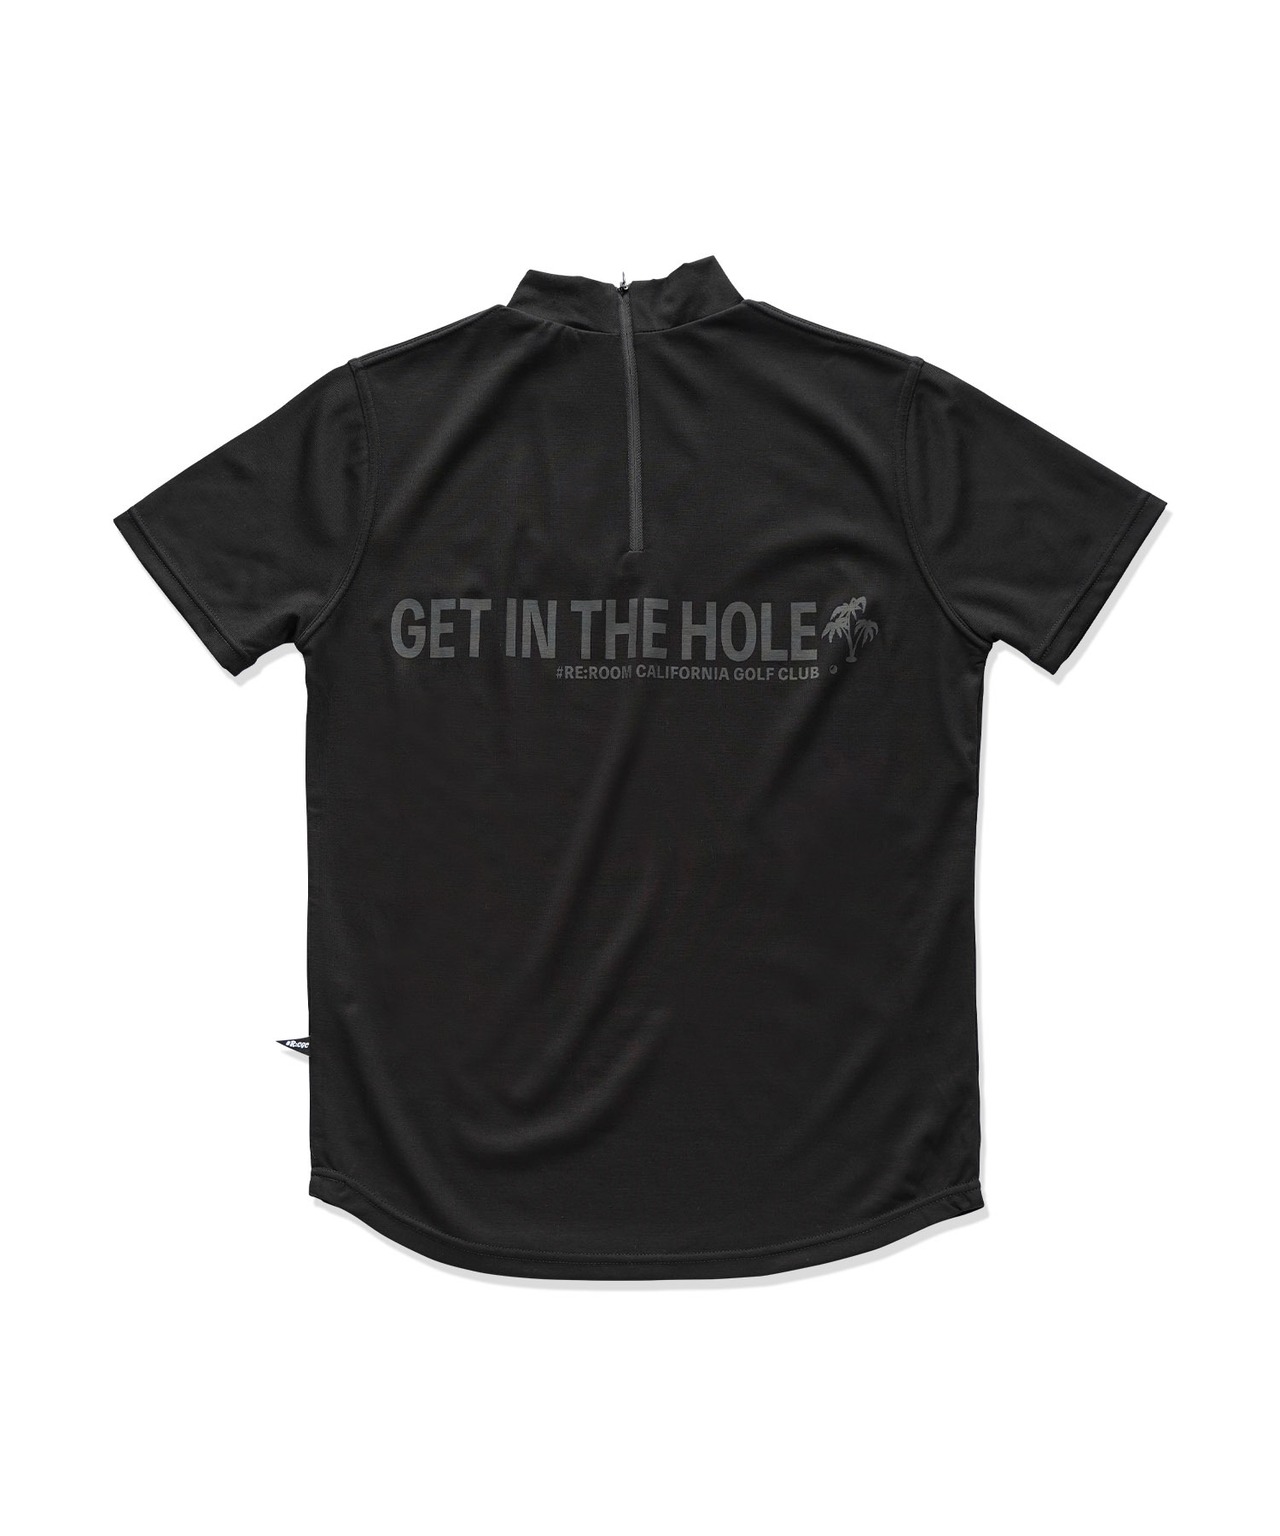 【RCGC】GET IN THE HOLE PRINT MOCK NECK T-shirt FOR LADYS［RGC007］